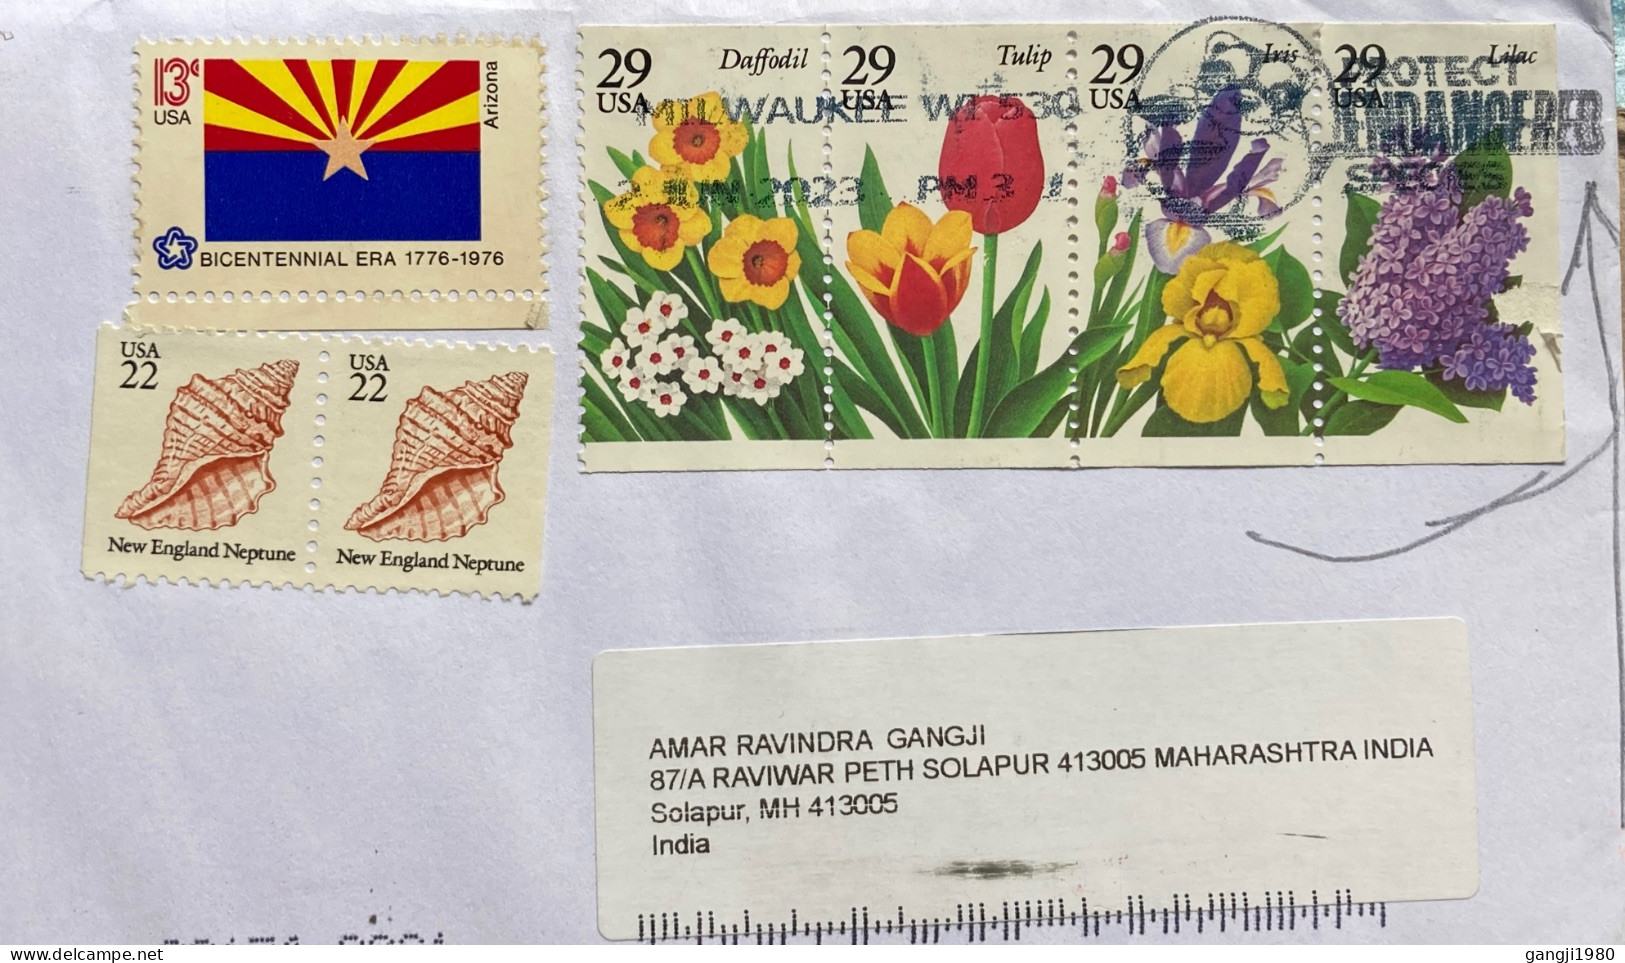 USA-2023, COVER USED TO INDIA, FLOWER SE-TENENT, ARIZONA FLAG, COUNCH & SHELL, PANDA ANIMAL, WWF, PROTECT ENDANGER SPECI - Lettres & Documents